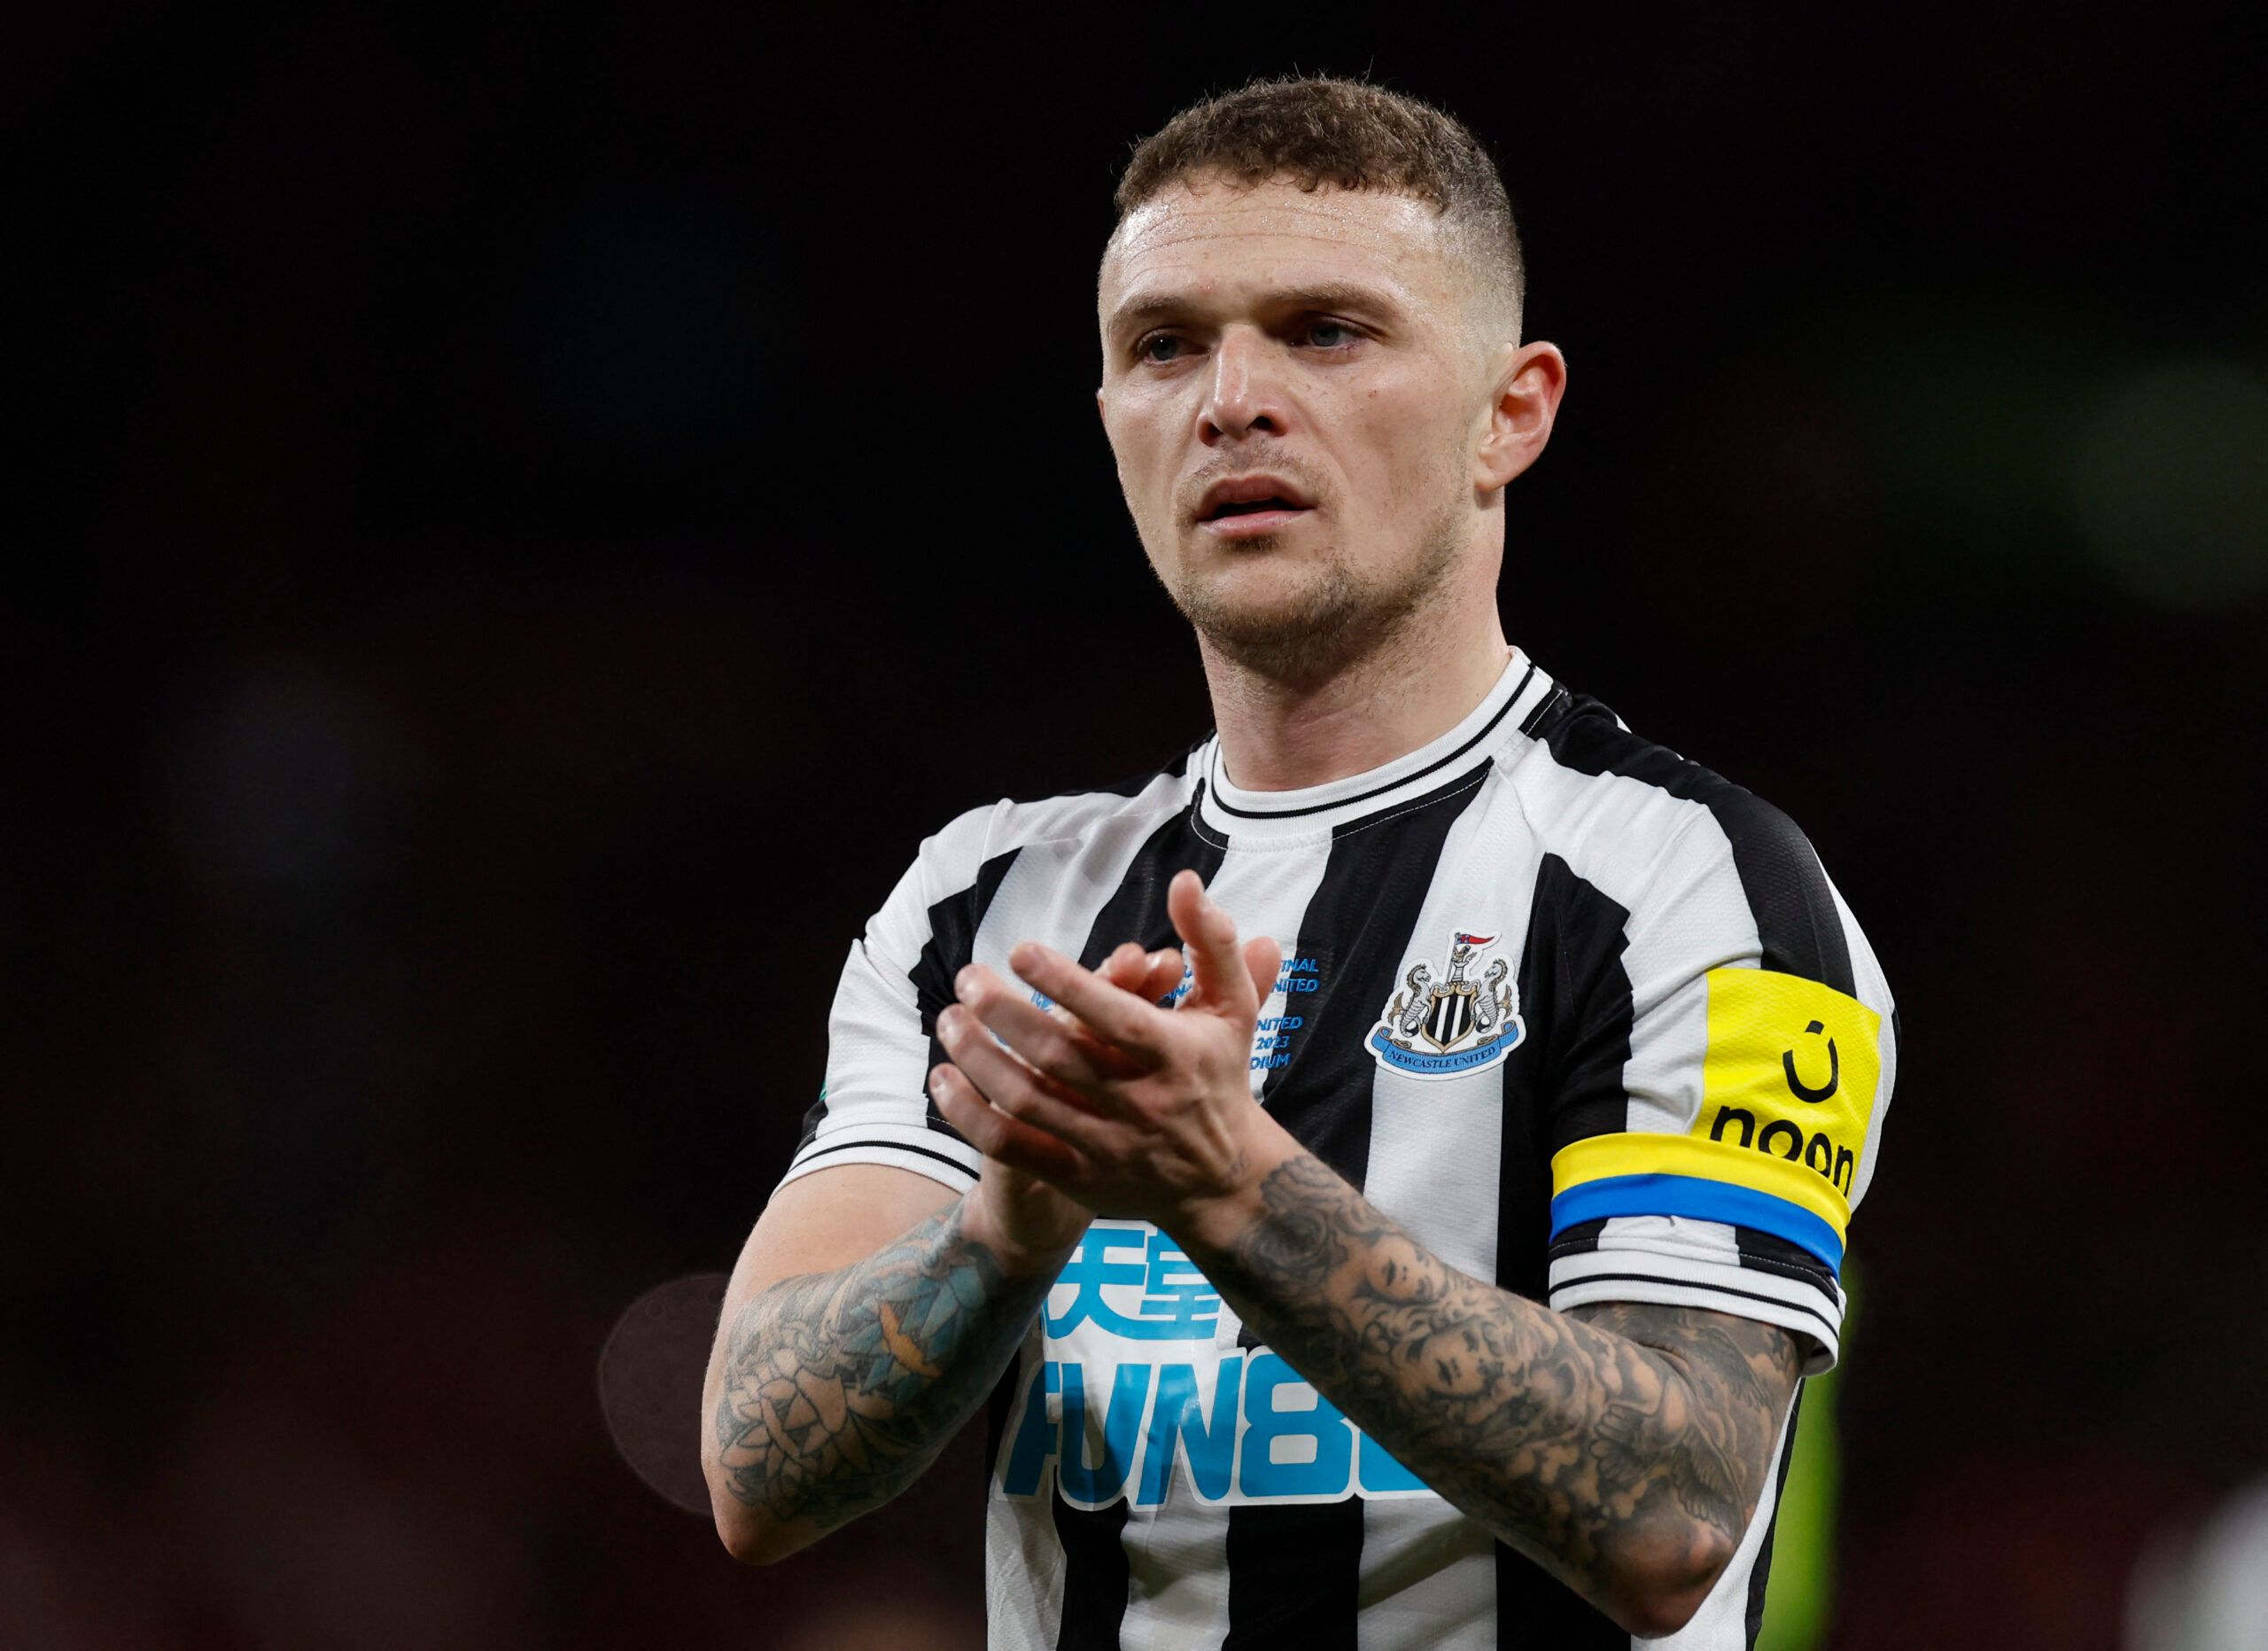 Soccer Football - Carabao Cup - Final - Manchester United v Newcastle United - Wembley Stadium, London, Britain - February 26, 2023  Newcastle United's Kieran Trippier looks dejected after losing the Carabao Cup final Action Images via Reuters/Andrew Couldridge EDITORIAL USE ONLY. No use with unauthorized audio, video, data, fixture lists, club/league logos or 'live' services. Online in-match use limited to 75 images, no video emulation. No use in betting, games or single club /league/player pub